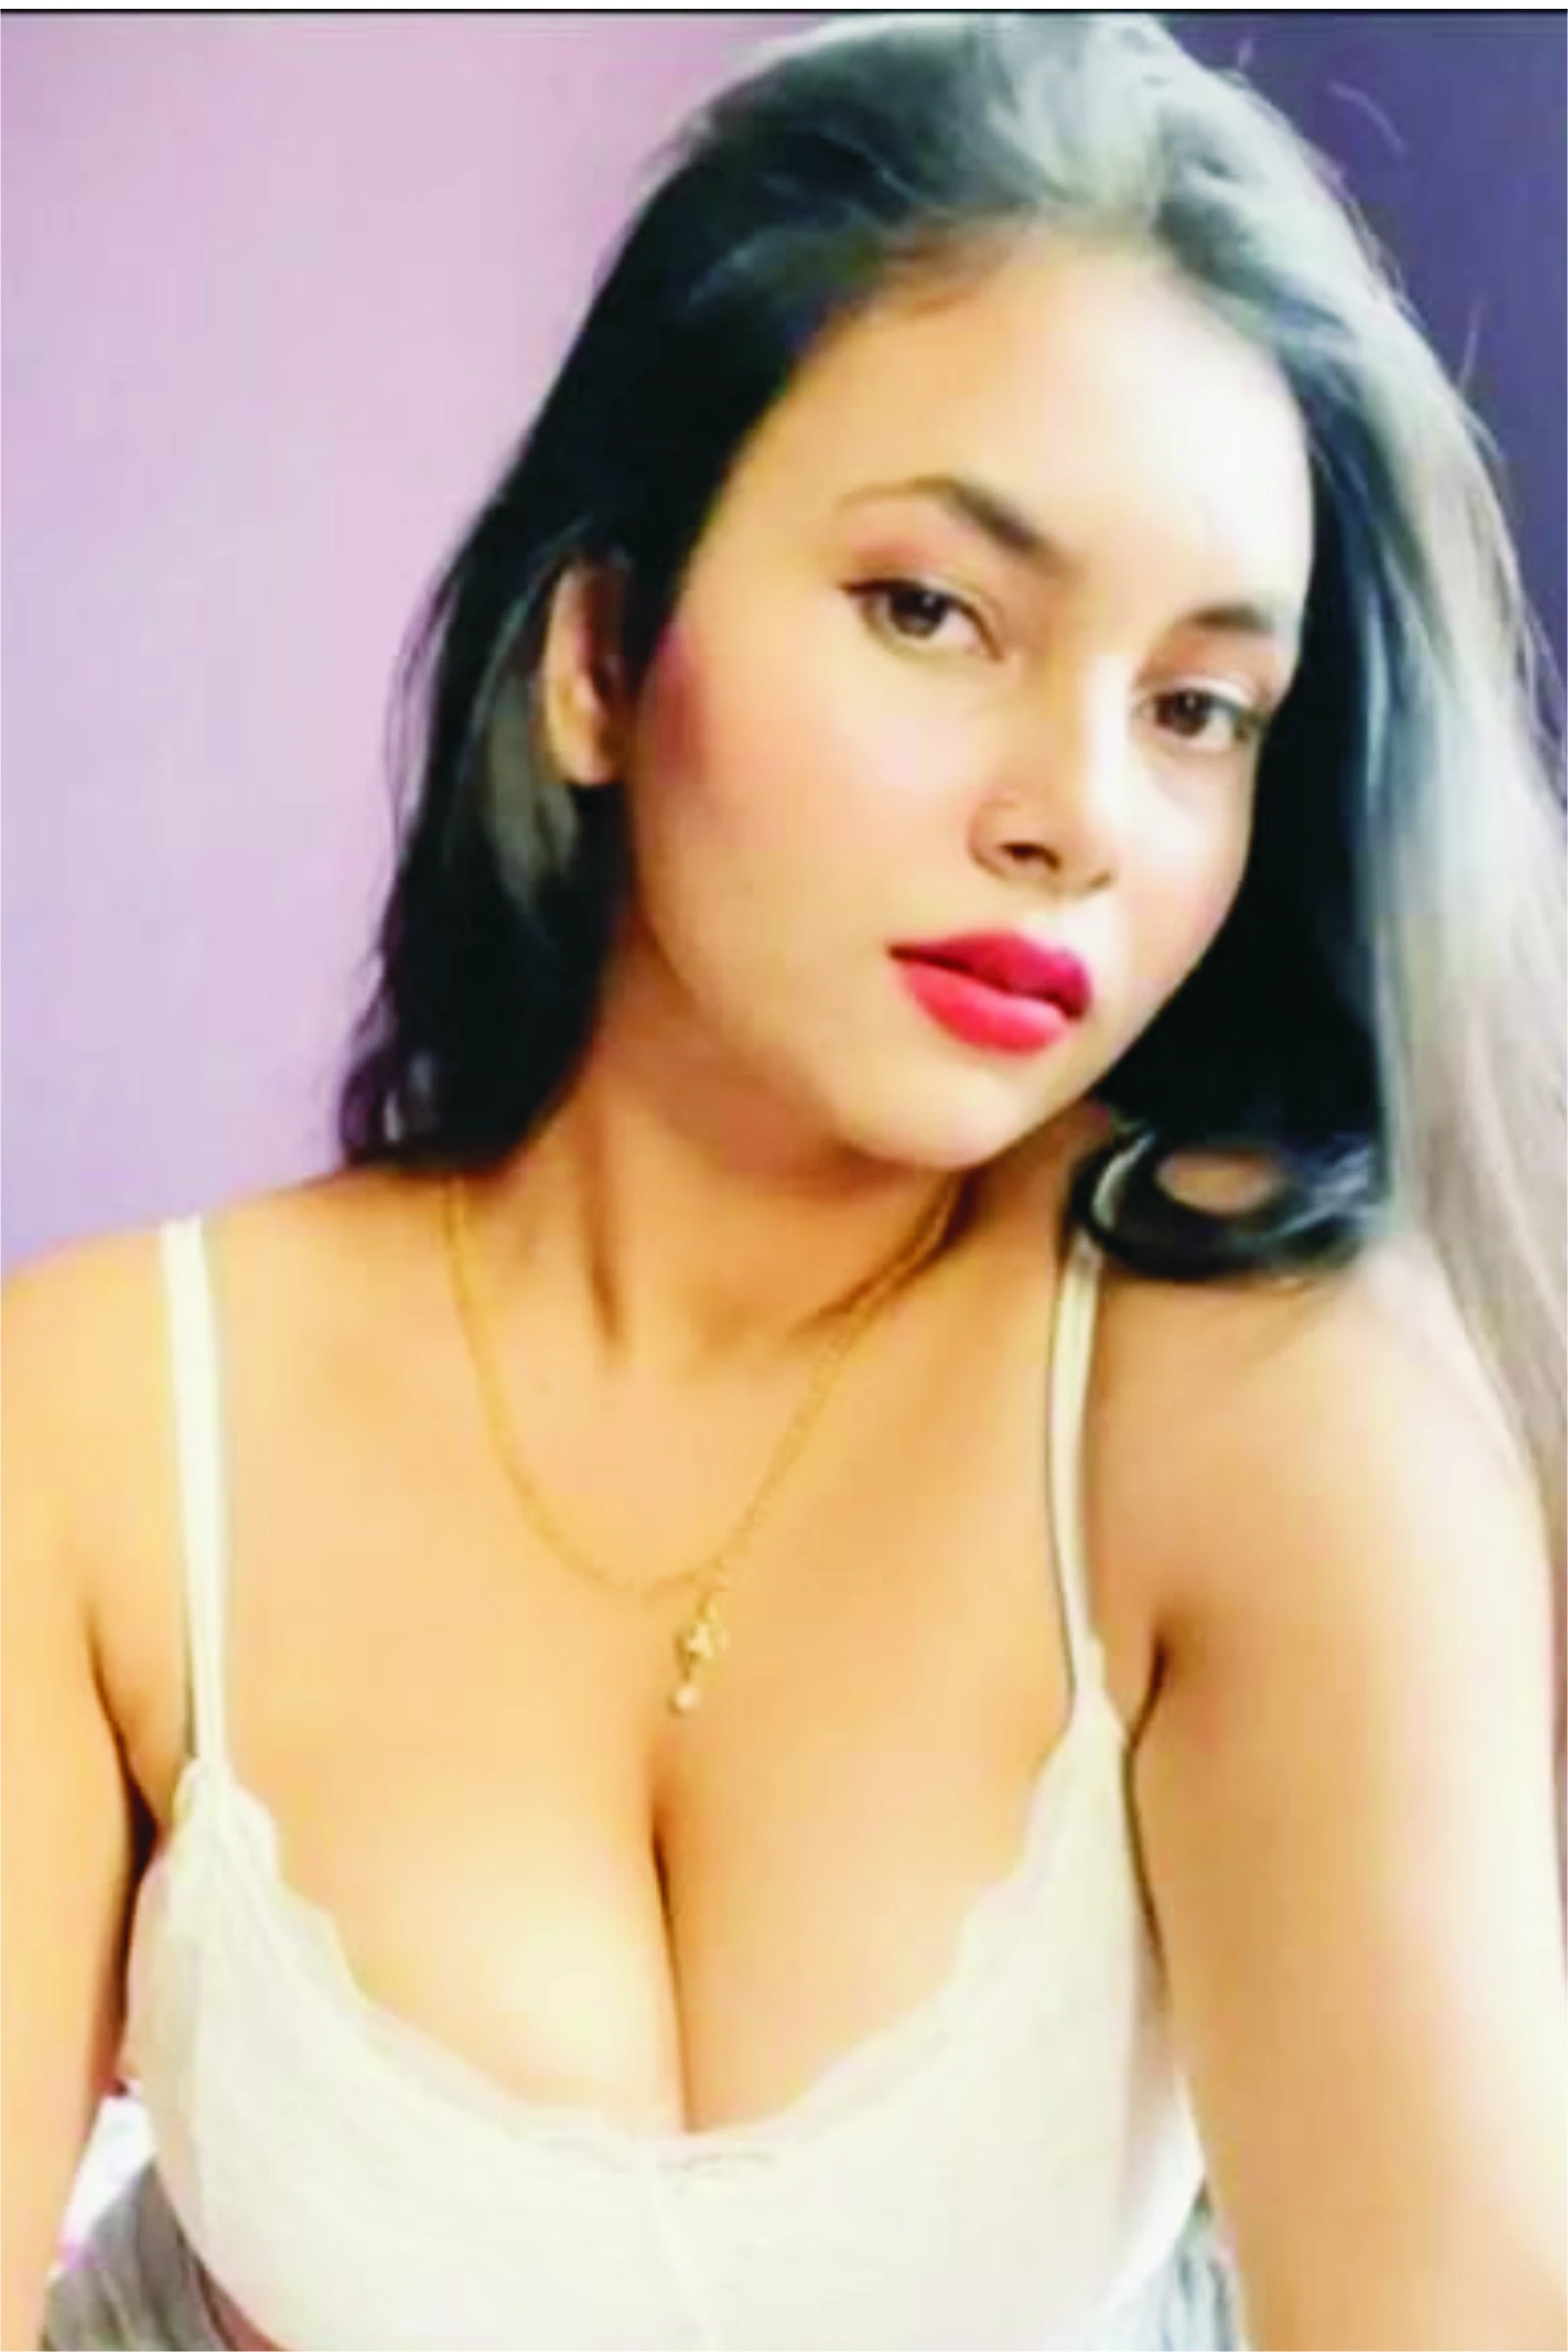 High Profile Bhabhi Call Girls in Lucknow With 100% Satisfaction